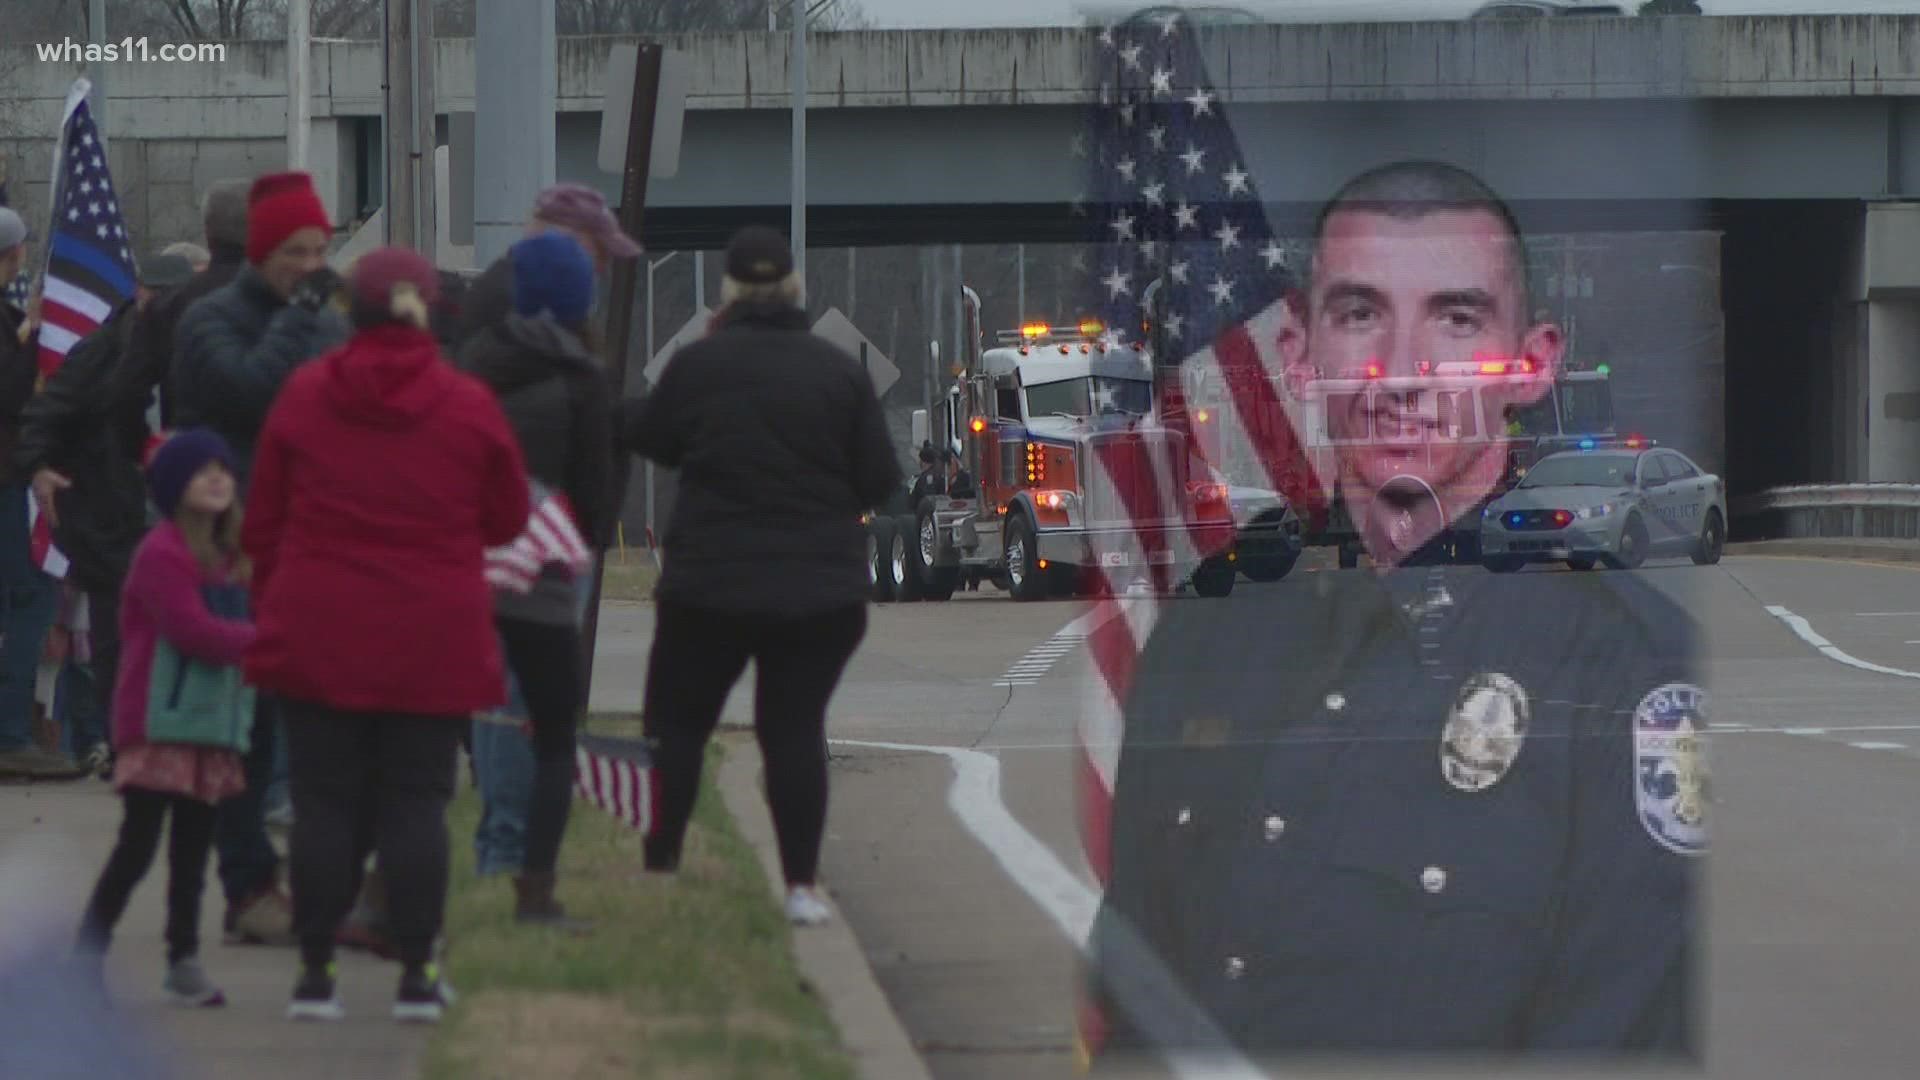 LMPD Officer Zachary Cottongim died Saturday after being hit by a driver on I-64. His former counselor said being a police officer was always his goal.